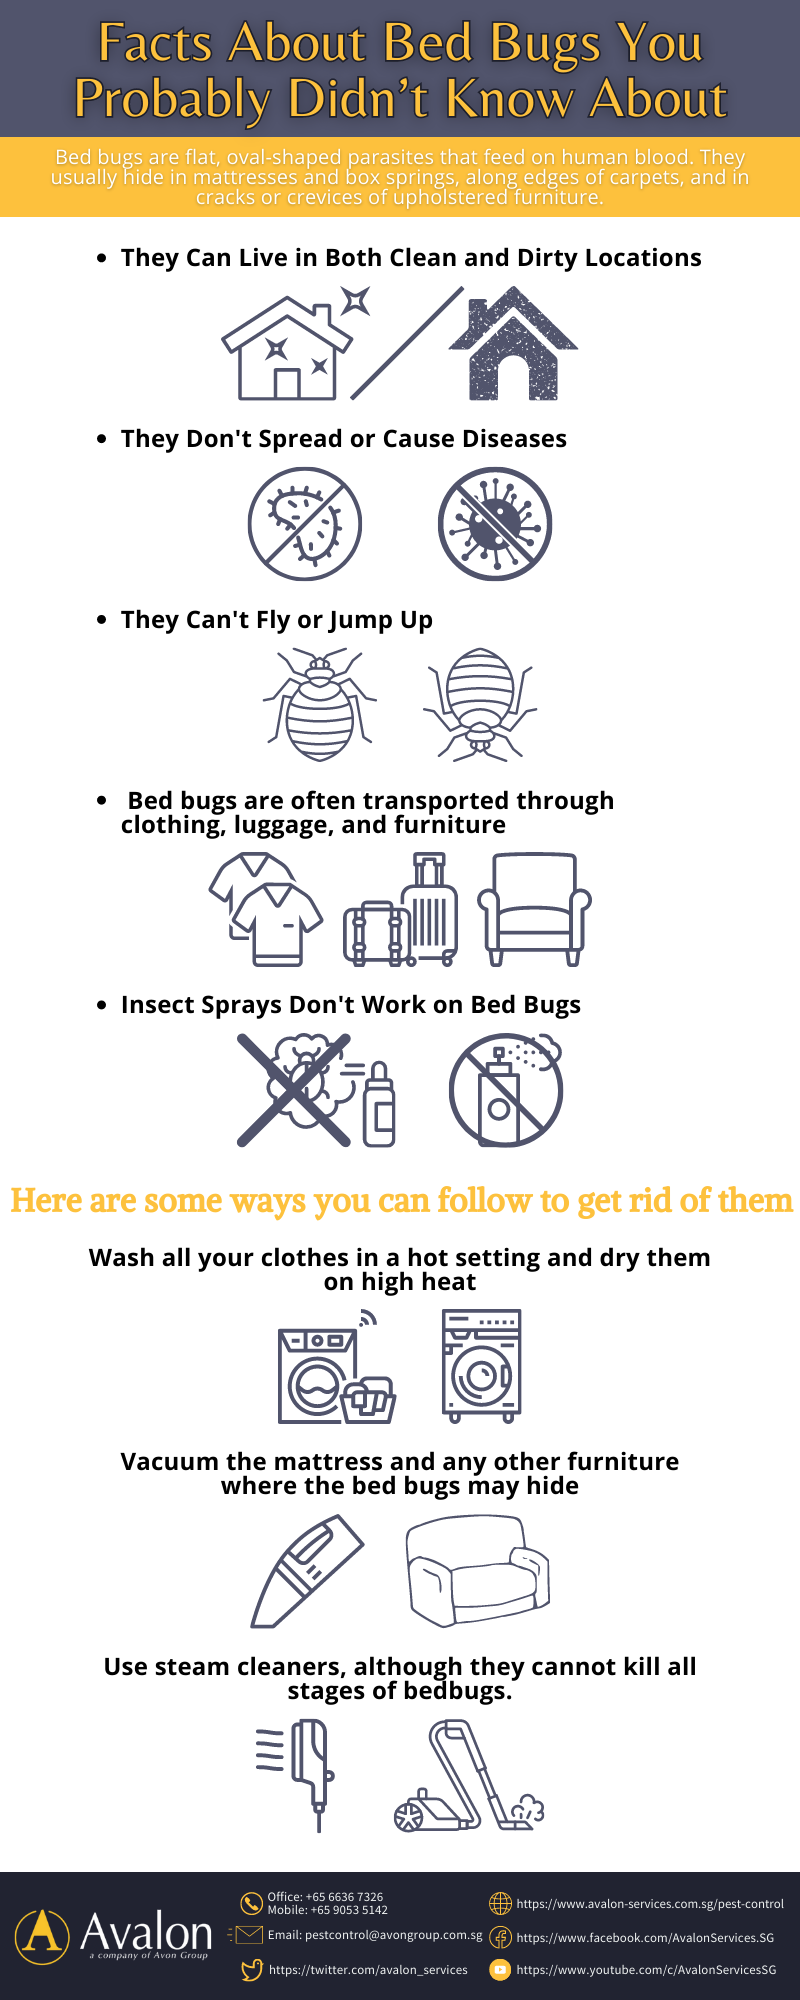 Facts About Bed Bugs You Probably Didn’t Know About